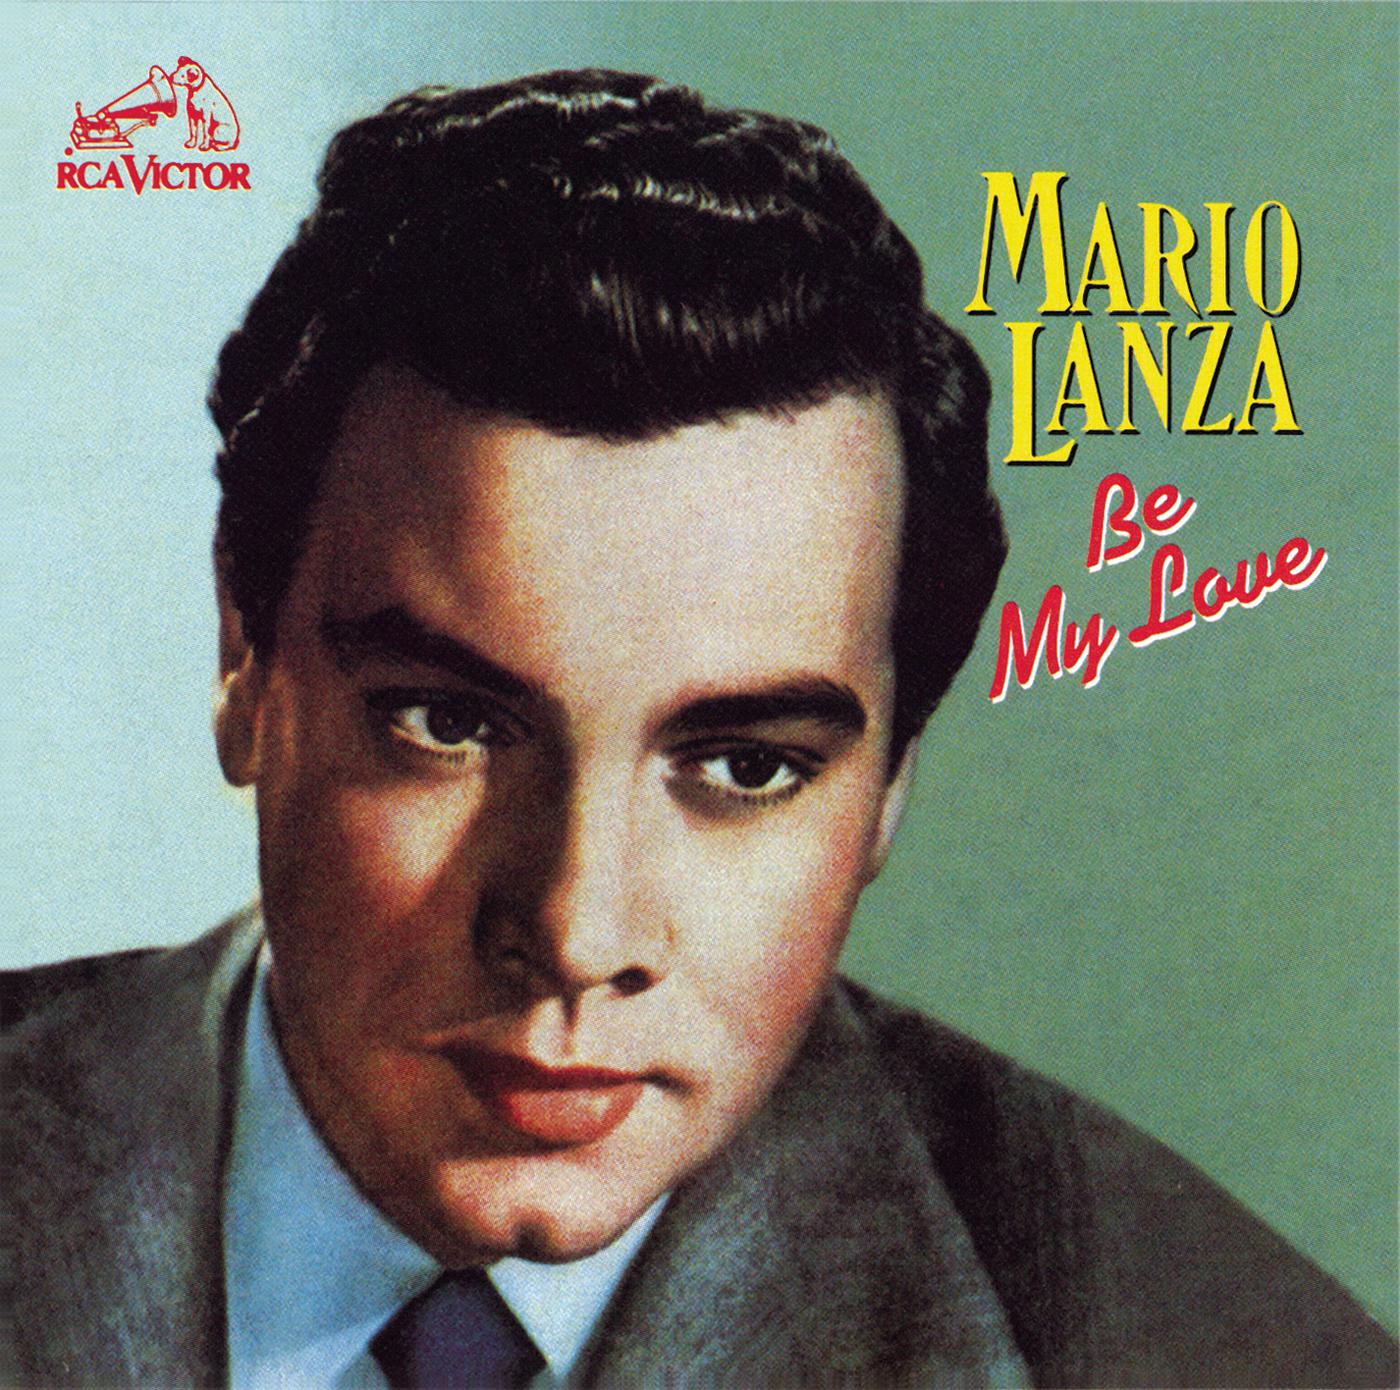 Mario Lanza - The Song Is You (from 